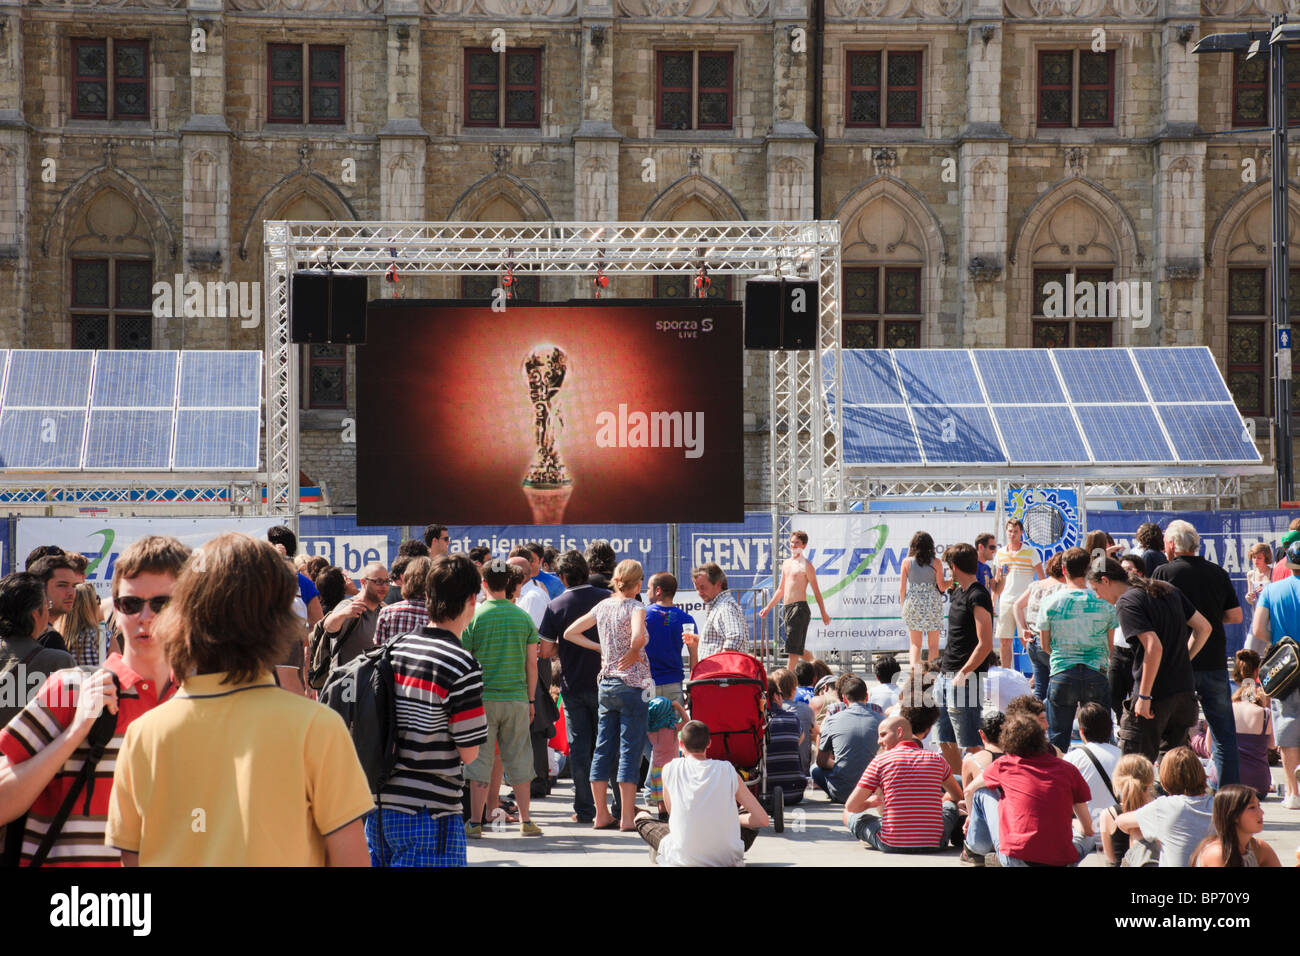 Crowd of people watching World Cup live football match on big screen solar powered television